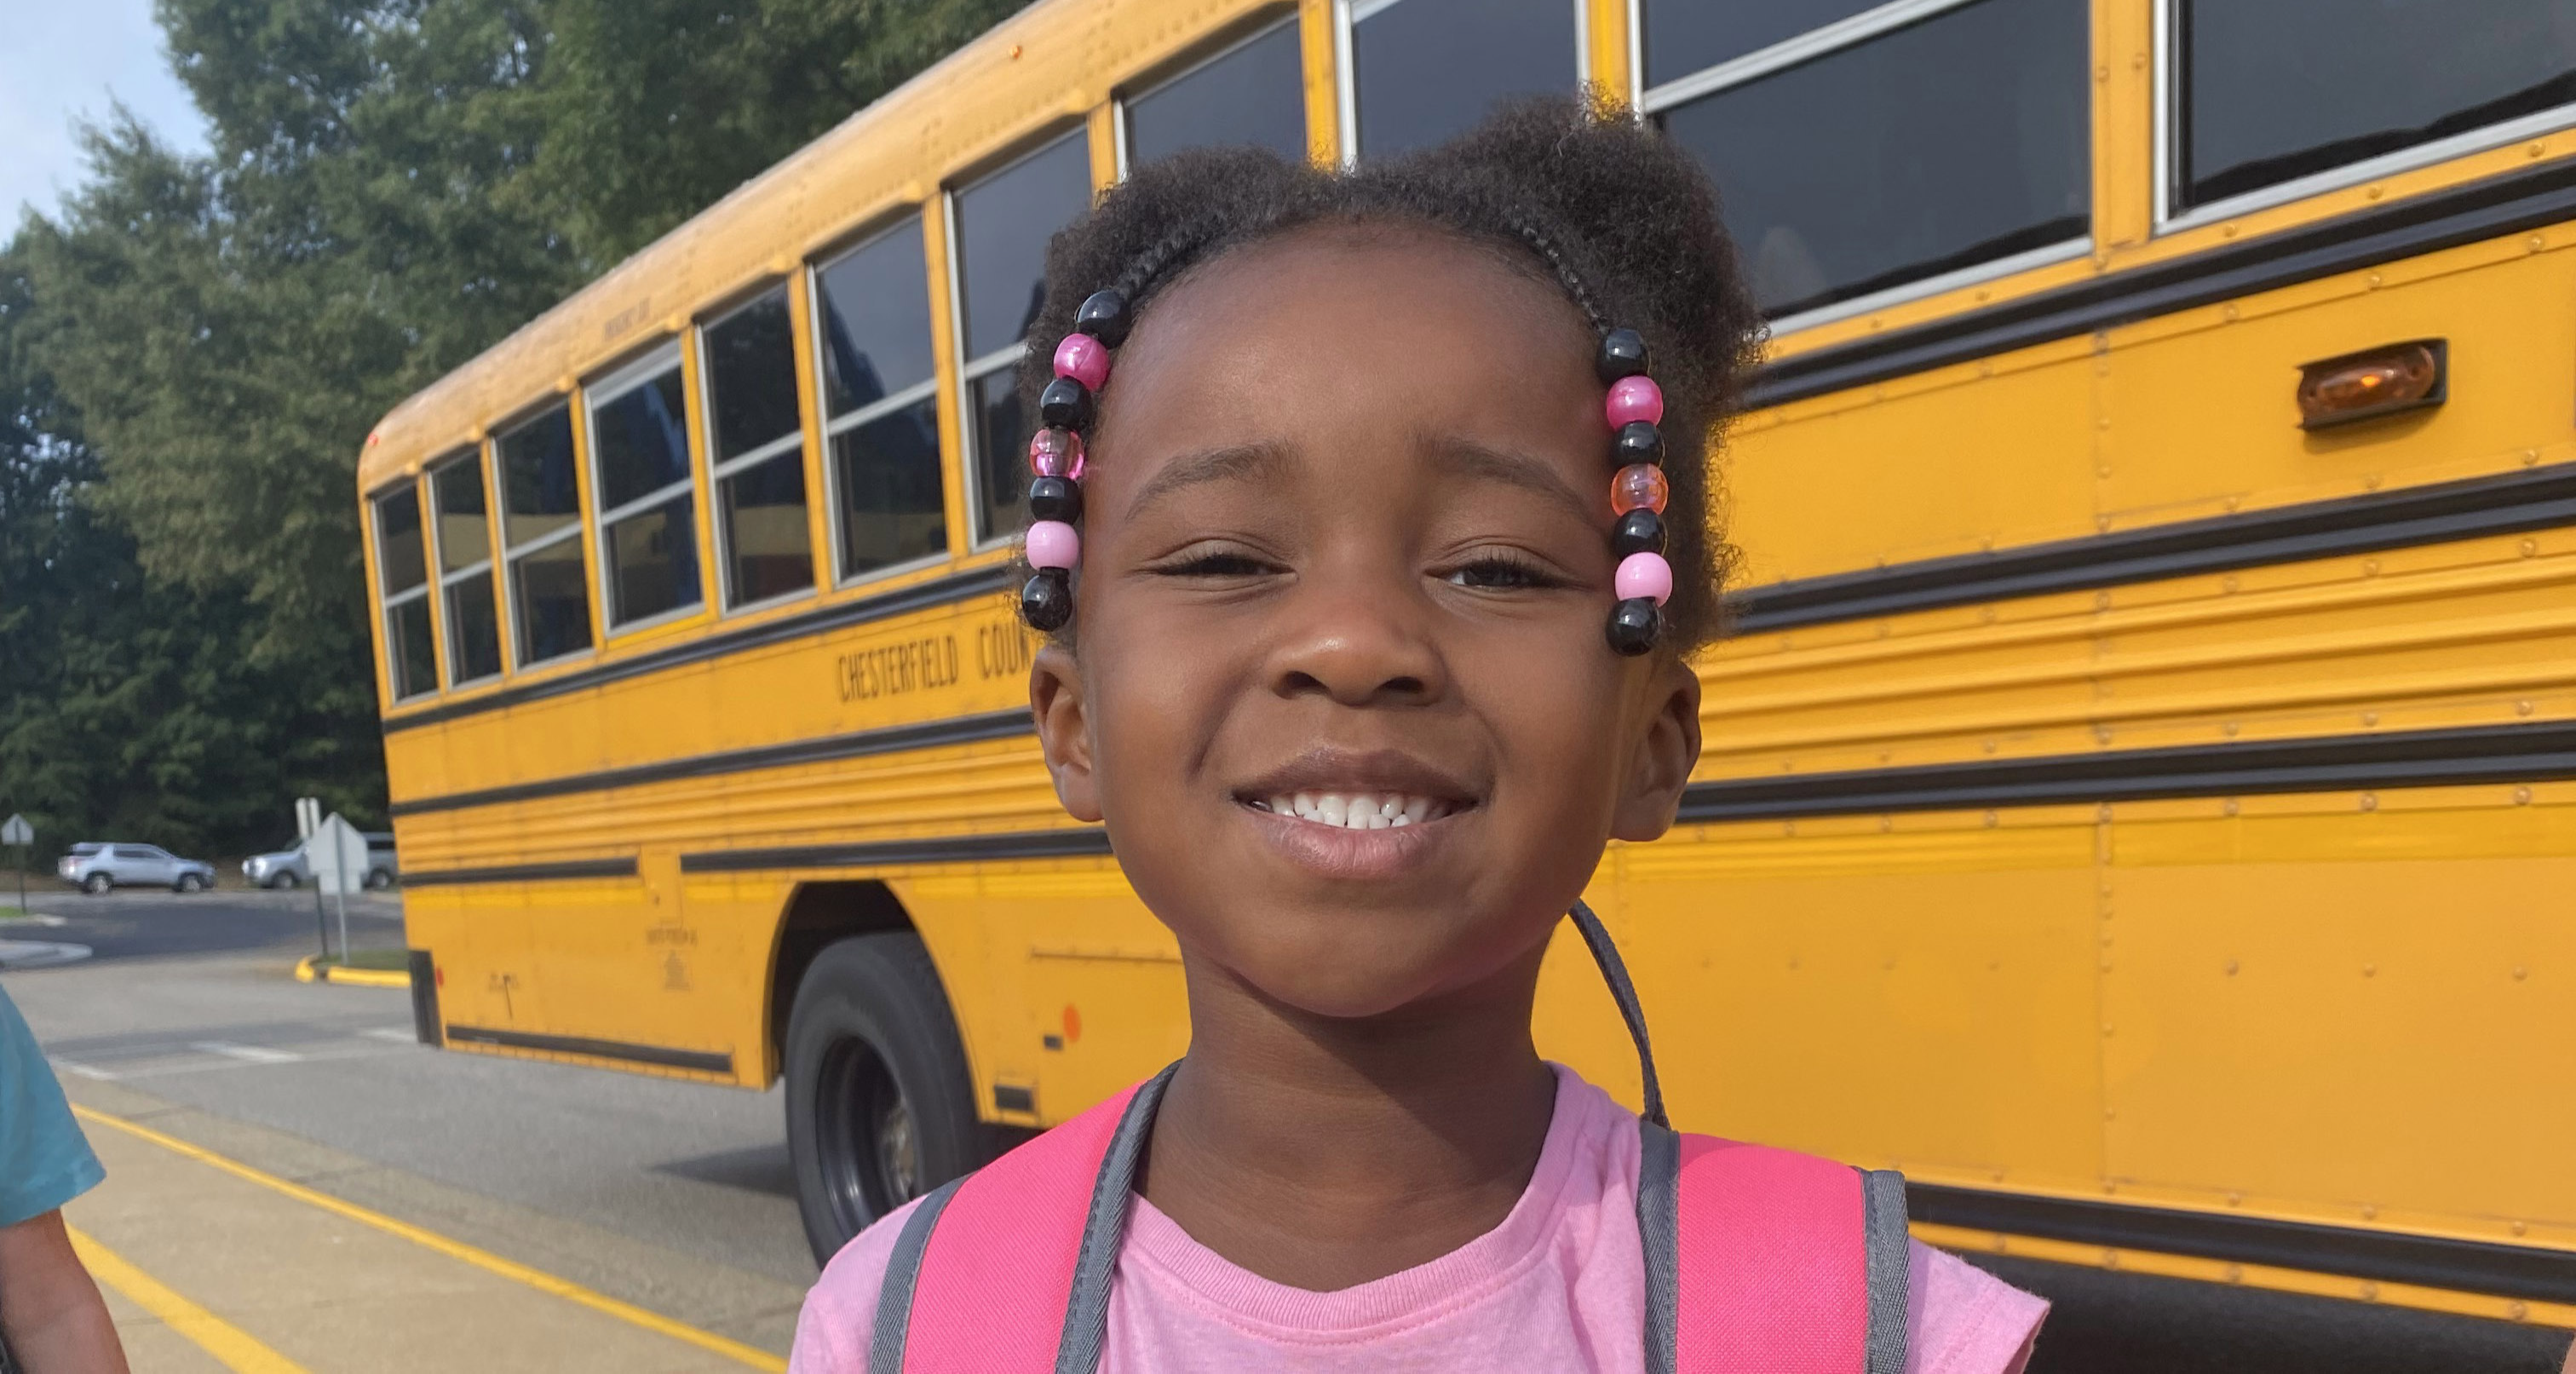 Child smiling in front of a school bus